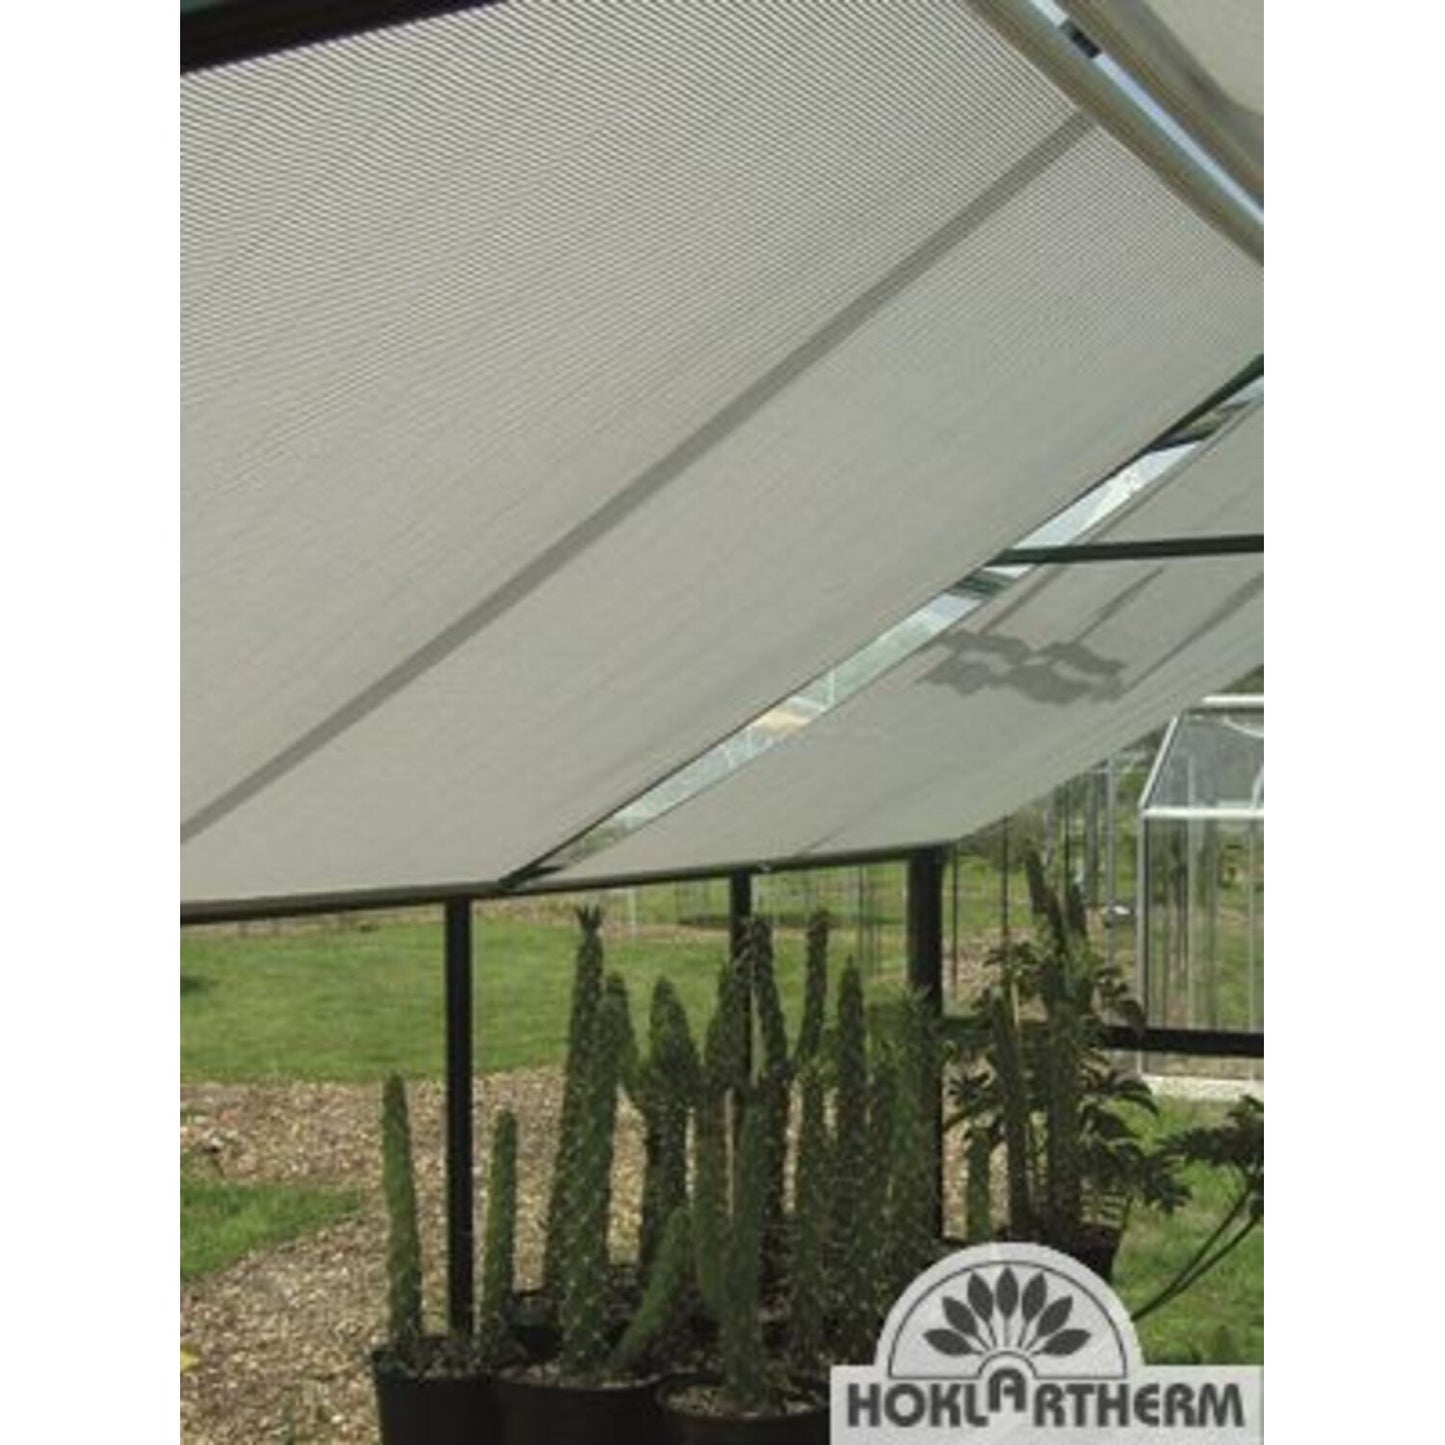 Hoklartherm | Retractable Shade Cloth Curtains for Greenhouses 8ft long in 6 widths, White Aluminized